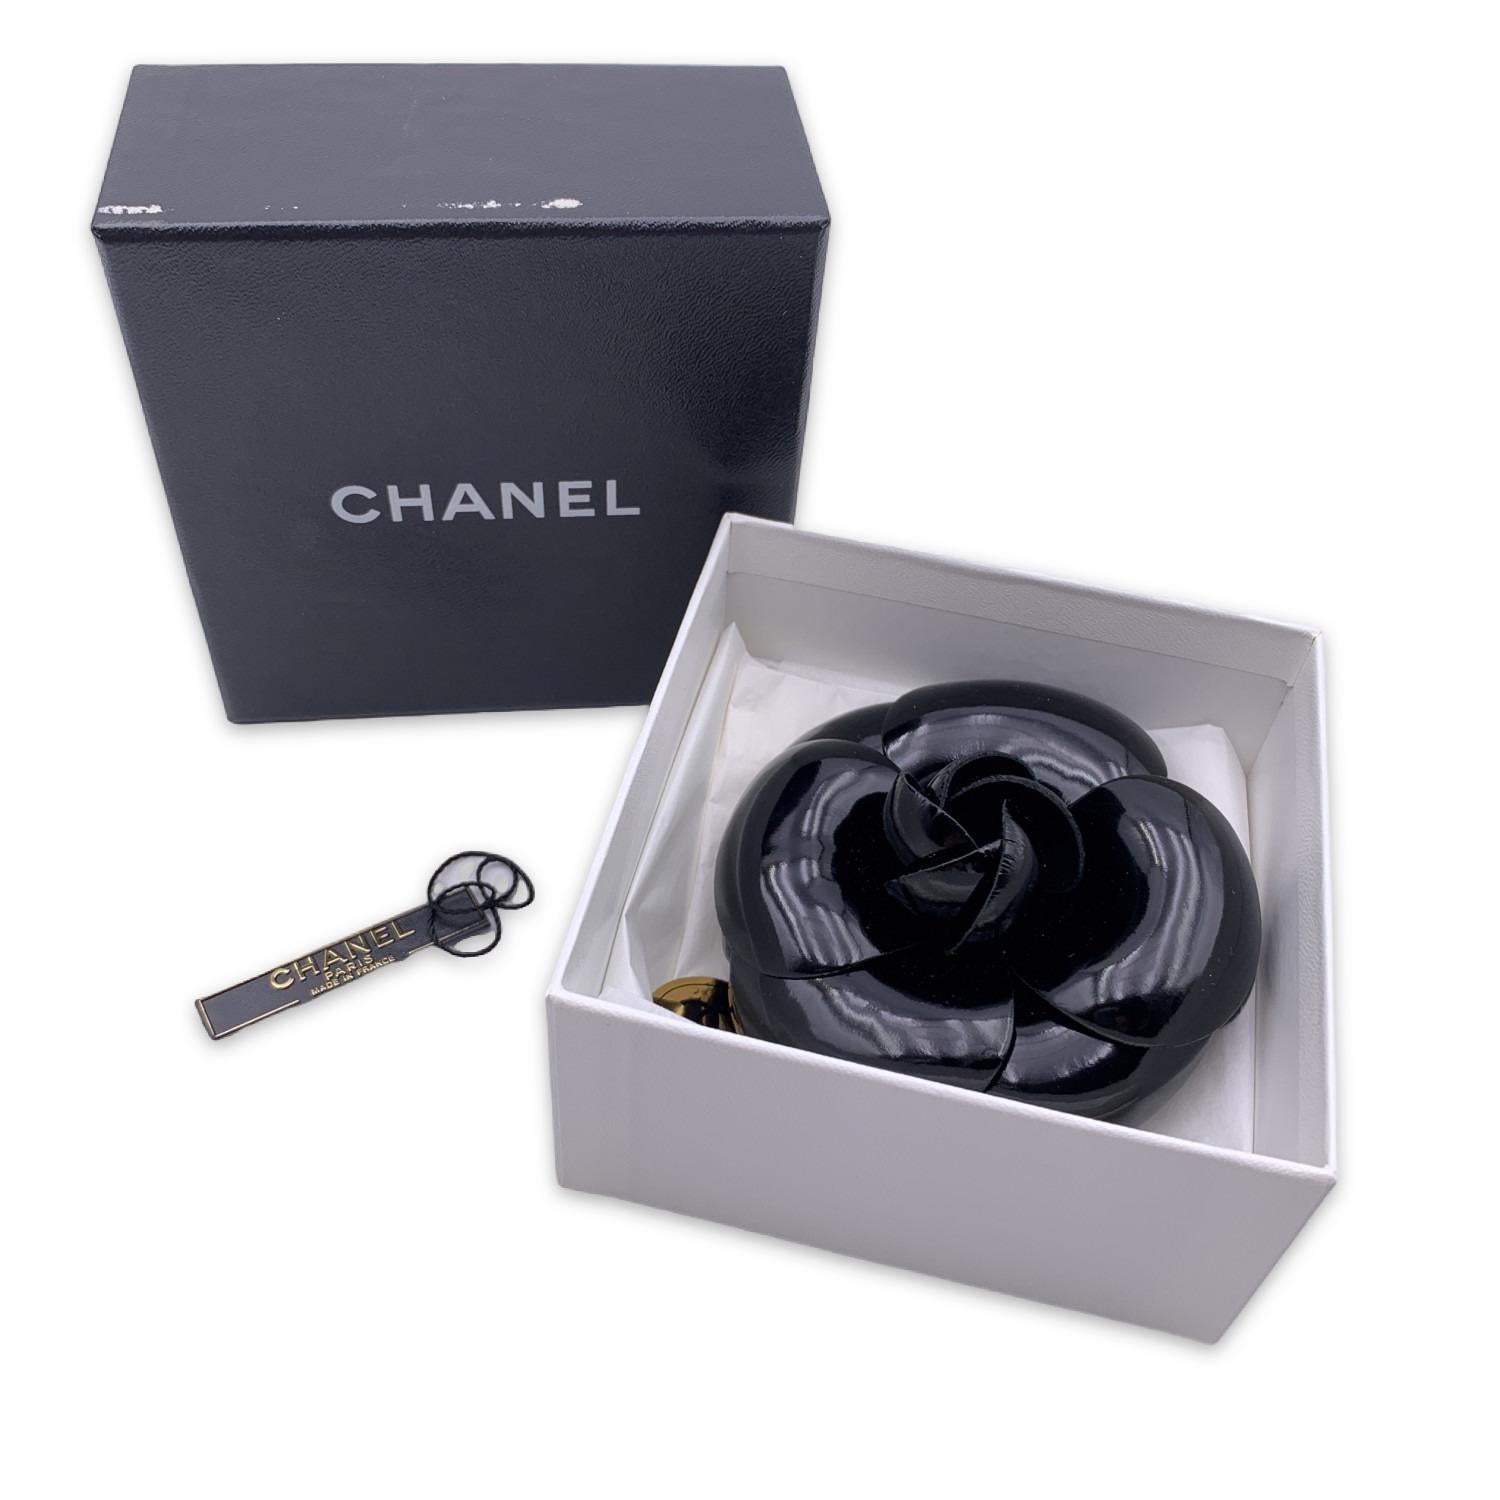 Chanel Vintage Camelia Camellia Flower Pin Brooch. Black vinyl petals. Safety pin closure. Measurements: diameter: 4 inches - 10.2 cm. 'CHANEL - CC - Made in France' oval tab on the back

Condition

A - EXCELLENT

Gently used. Minimal wear of use on